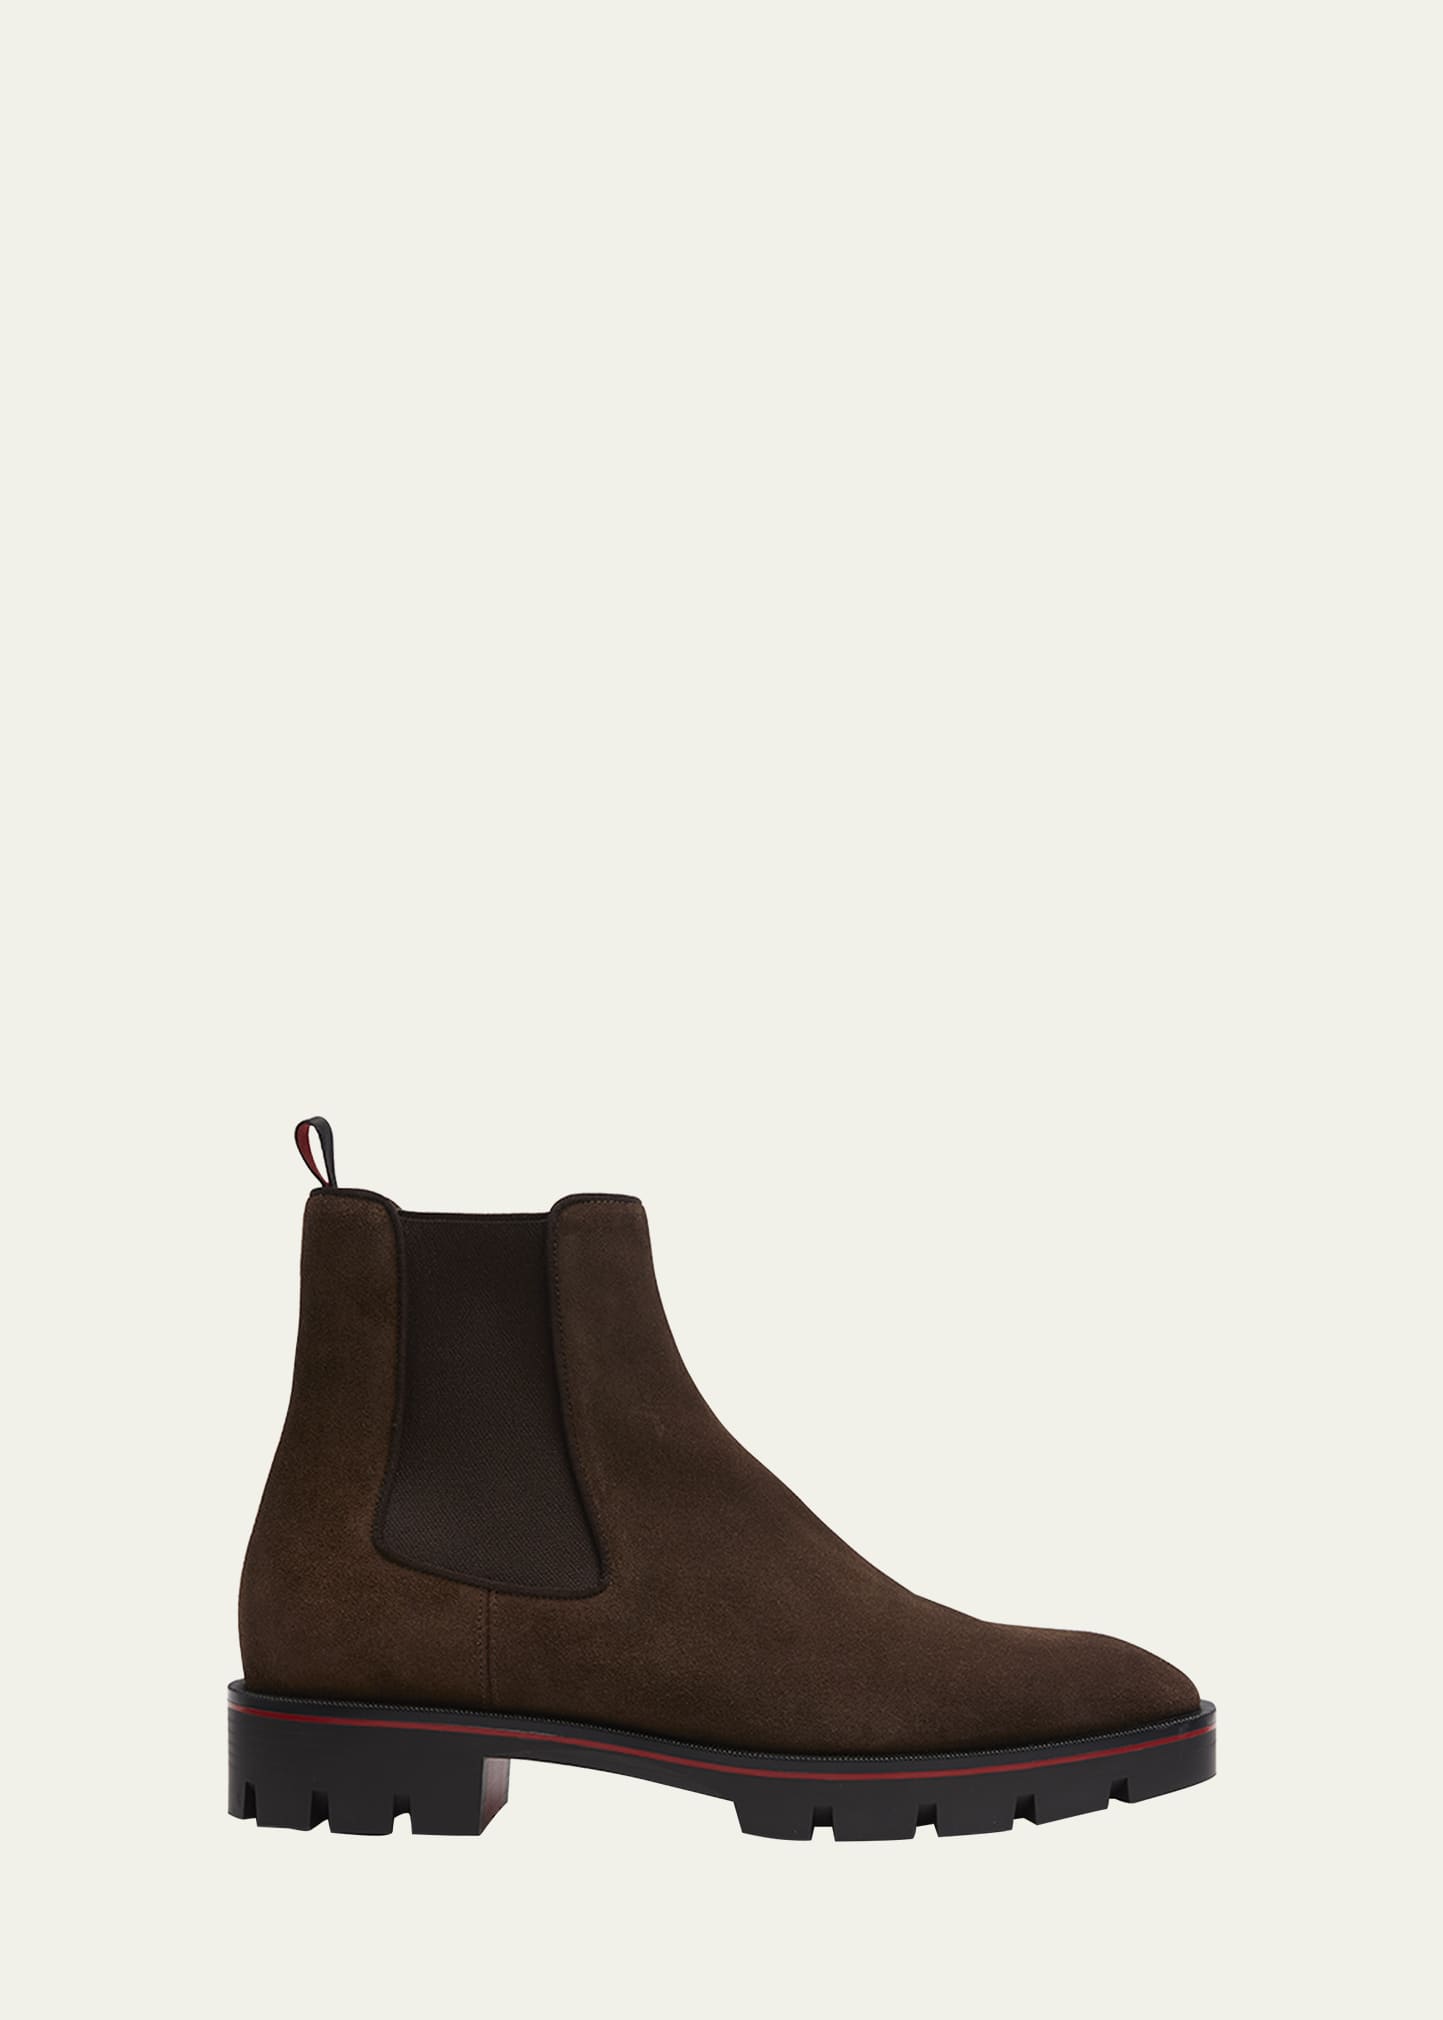 Buy Christian Louboutin Chelsea Boots online - Men - 22 products